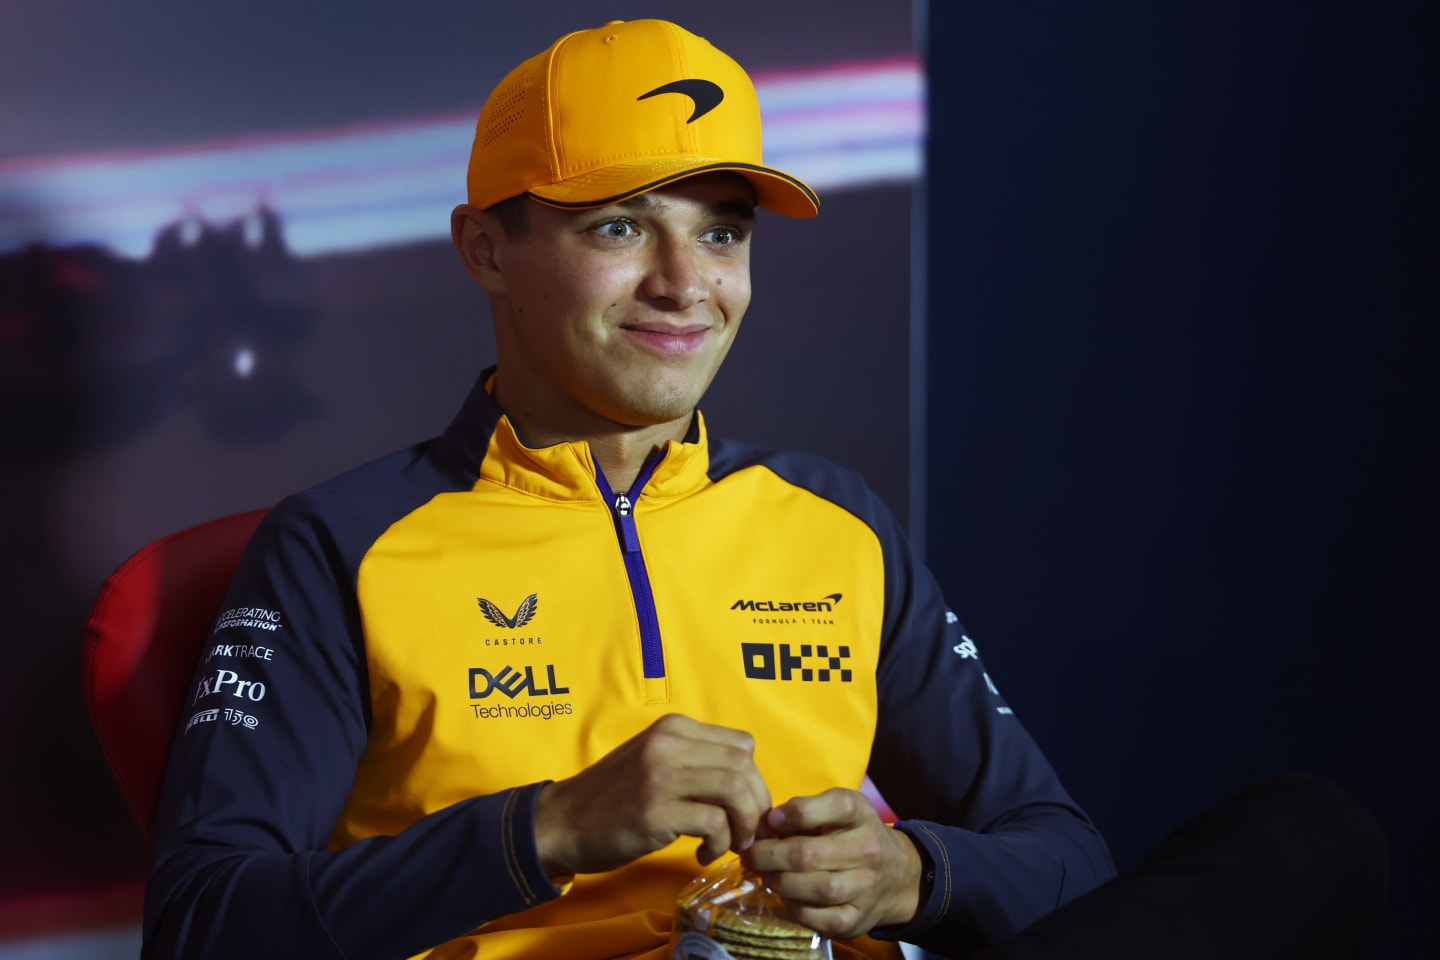 ZANDVOORT, NETHERLANDS - SEPTEMBER 01: Lando Norris of Great Britain and McLaren looks on in the Drivers Press Conference during previews ahead of the F1 Grand Prix of The Netherlands at Circuit Zandvoort on September 01, 2022 in Zandvoort, Netherlands. (Photo by Lars Baron/Getty Images)